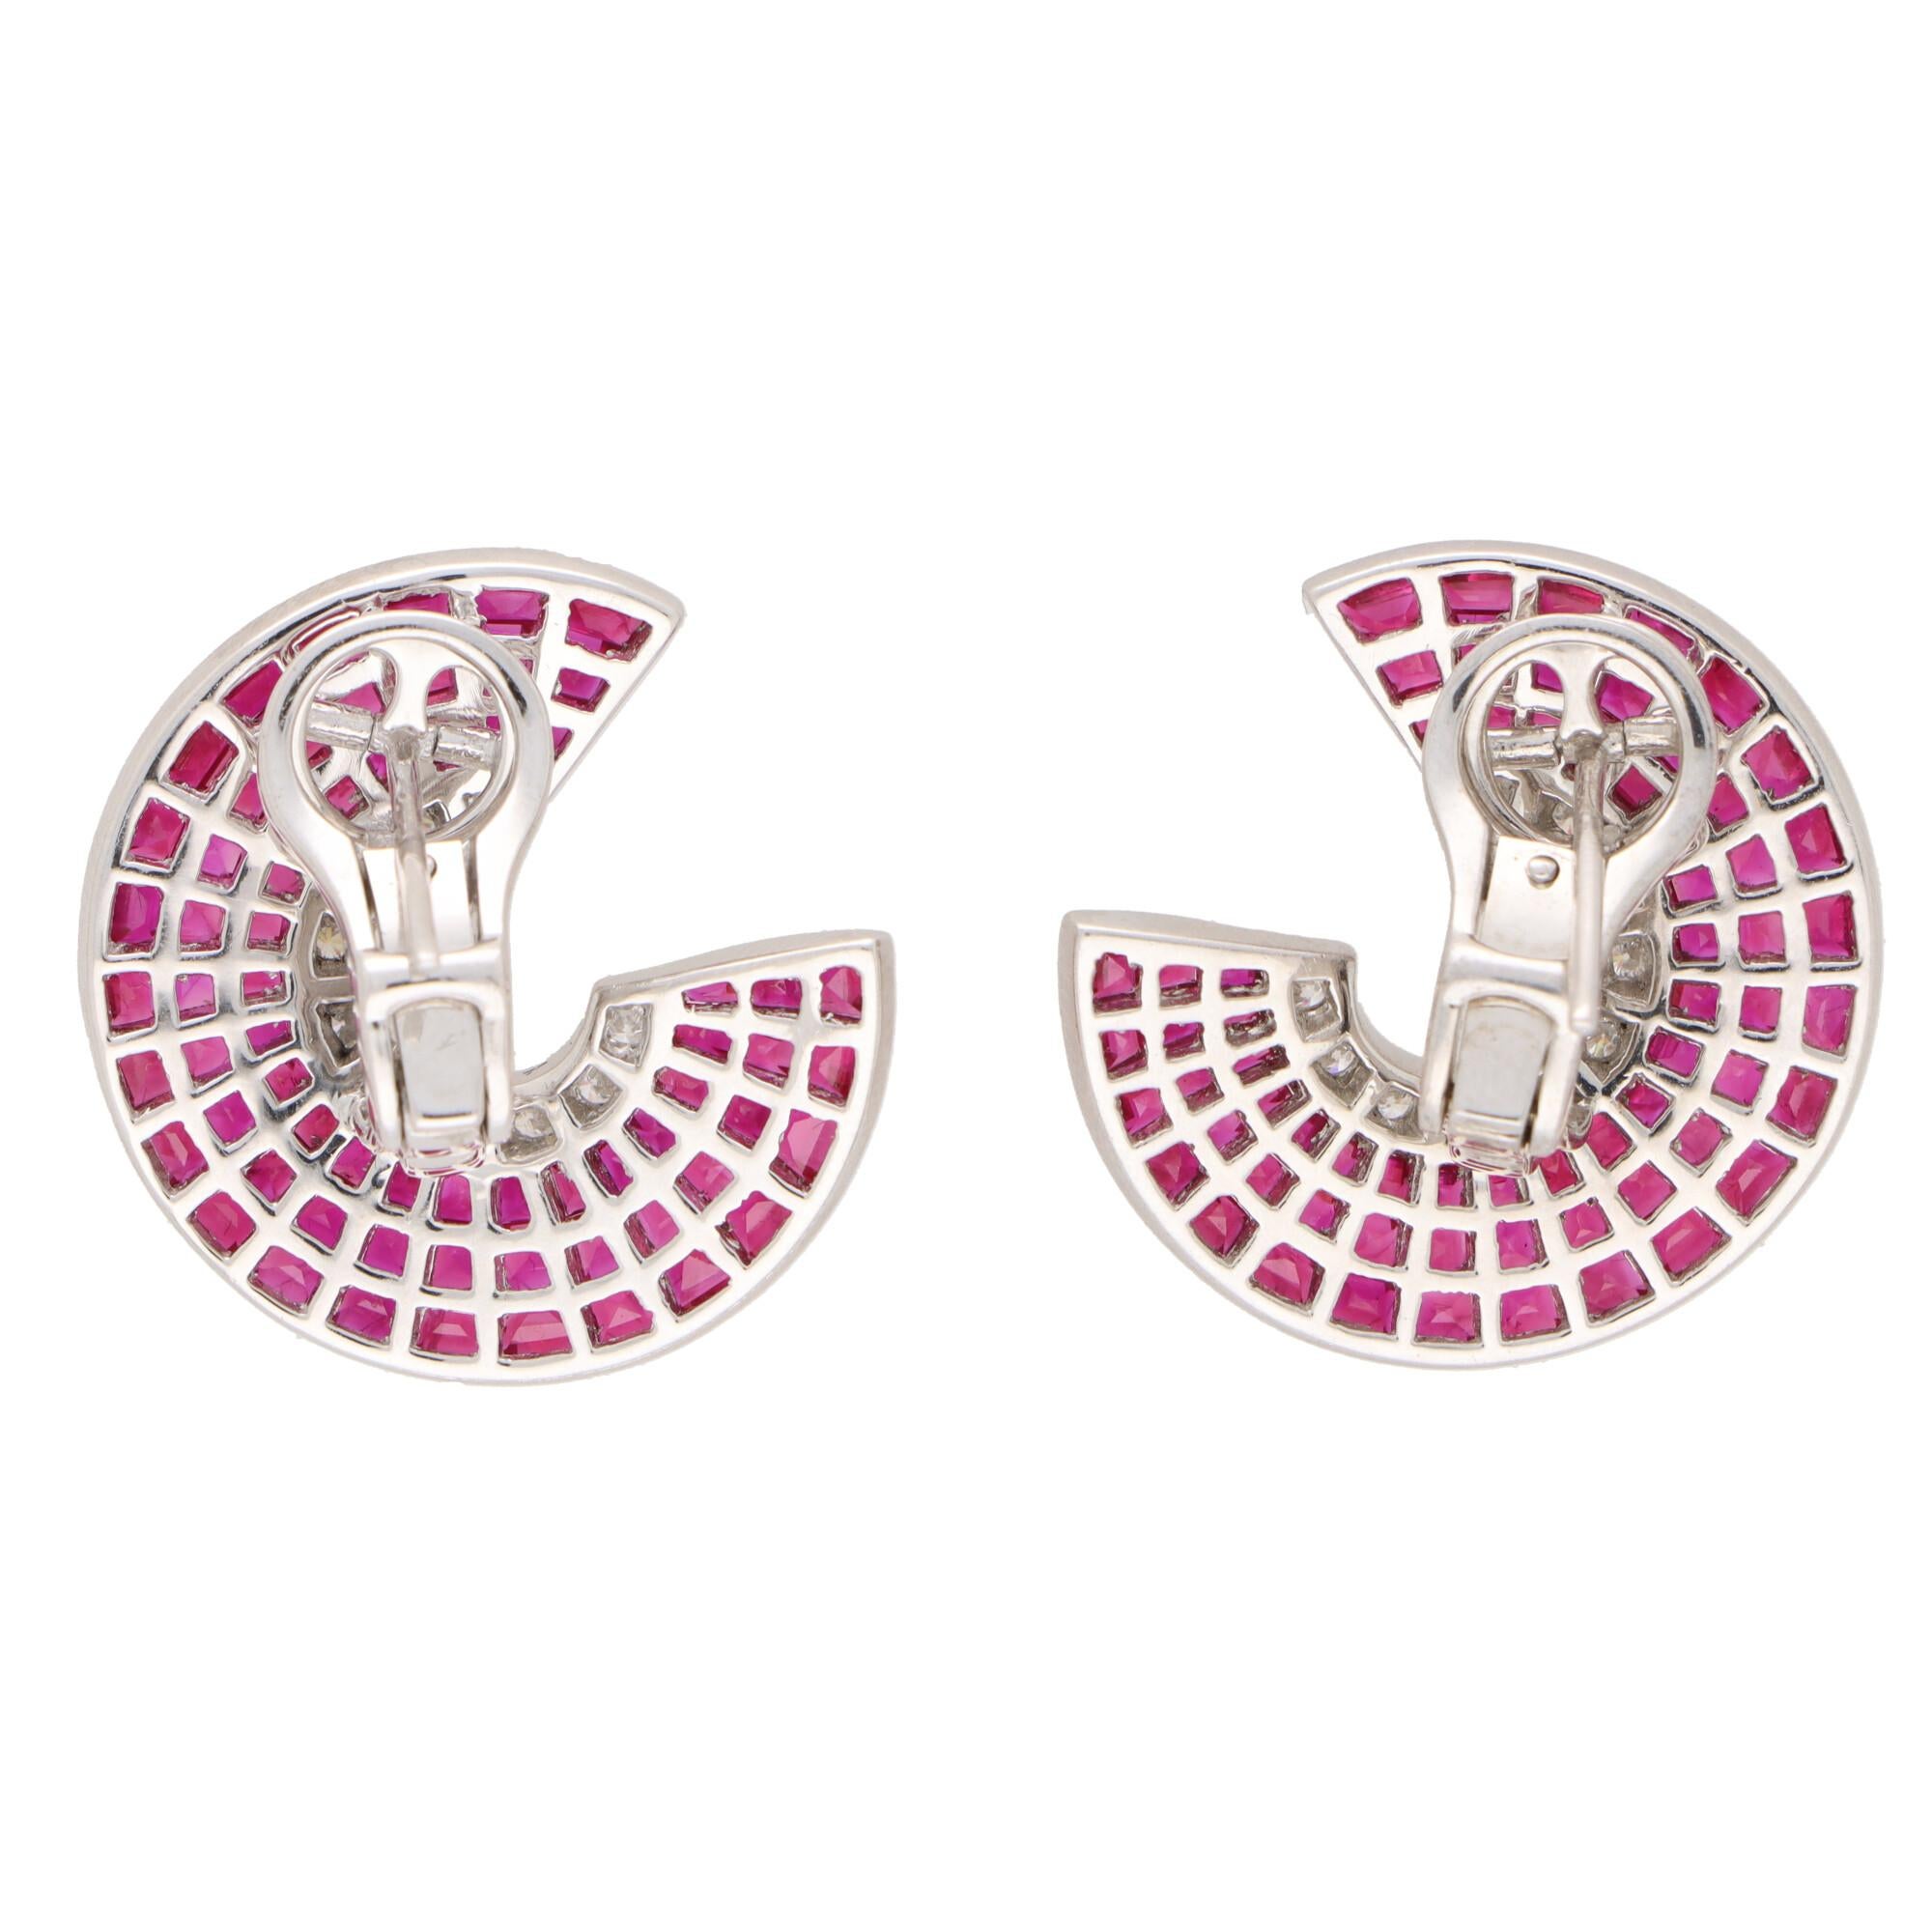  A beautiful pair of Art Deco inspired diamond and ruby swirl half hooped earrings set in platinum.

Each earring is composed of swirl design, designed to curve around the ear quite like a half hoop. The earrings are predominantly set with a panel